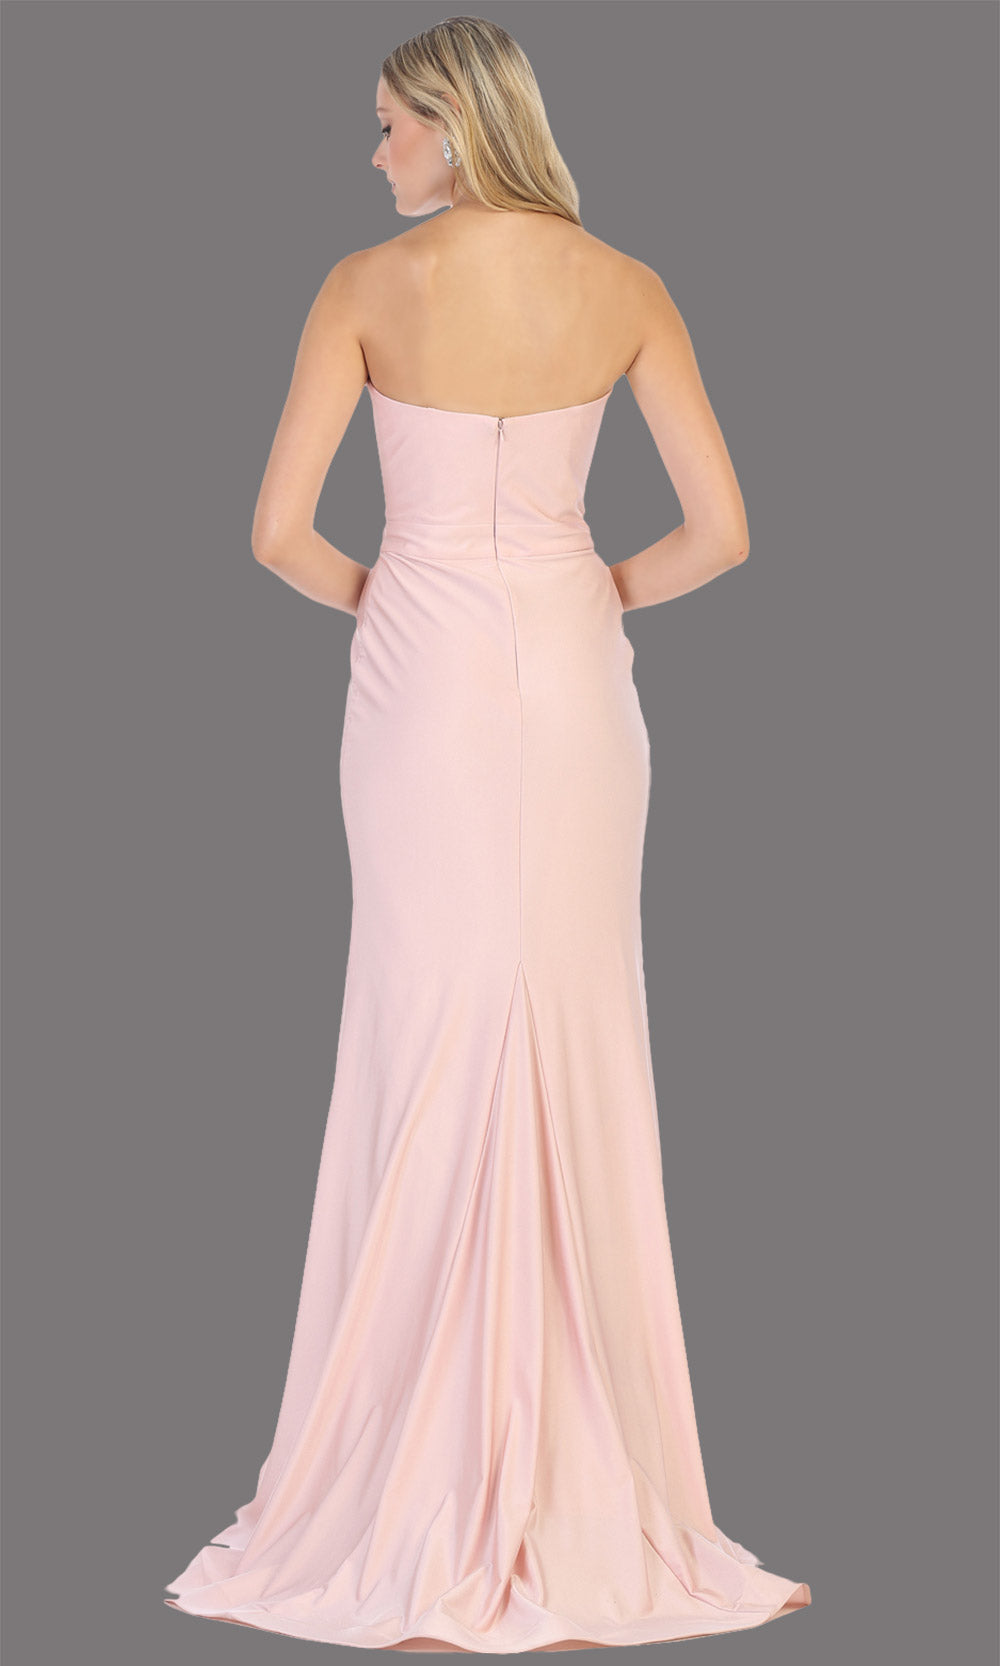 Mayqueen MQ1718 long mauve fitted strapless dress w/high slit. This sleek & sexy dusty rose dress is perfect as a bridesmaid dress, prom dress, formal wedding guest dress, gala, black tie event, engagement/e-shoot dress. Plus sizes available-back